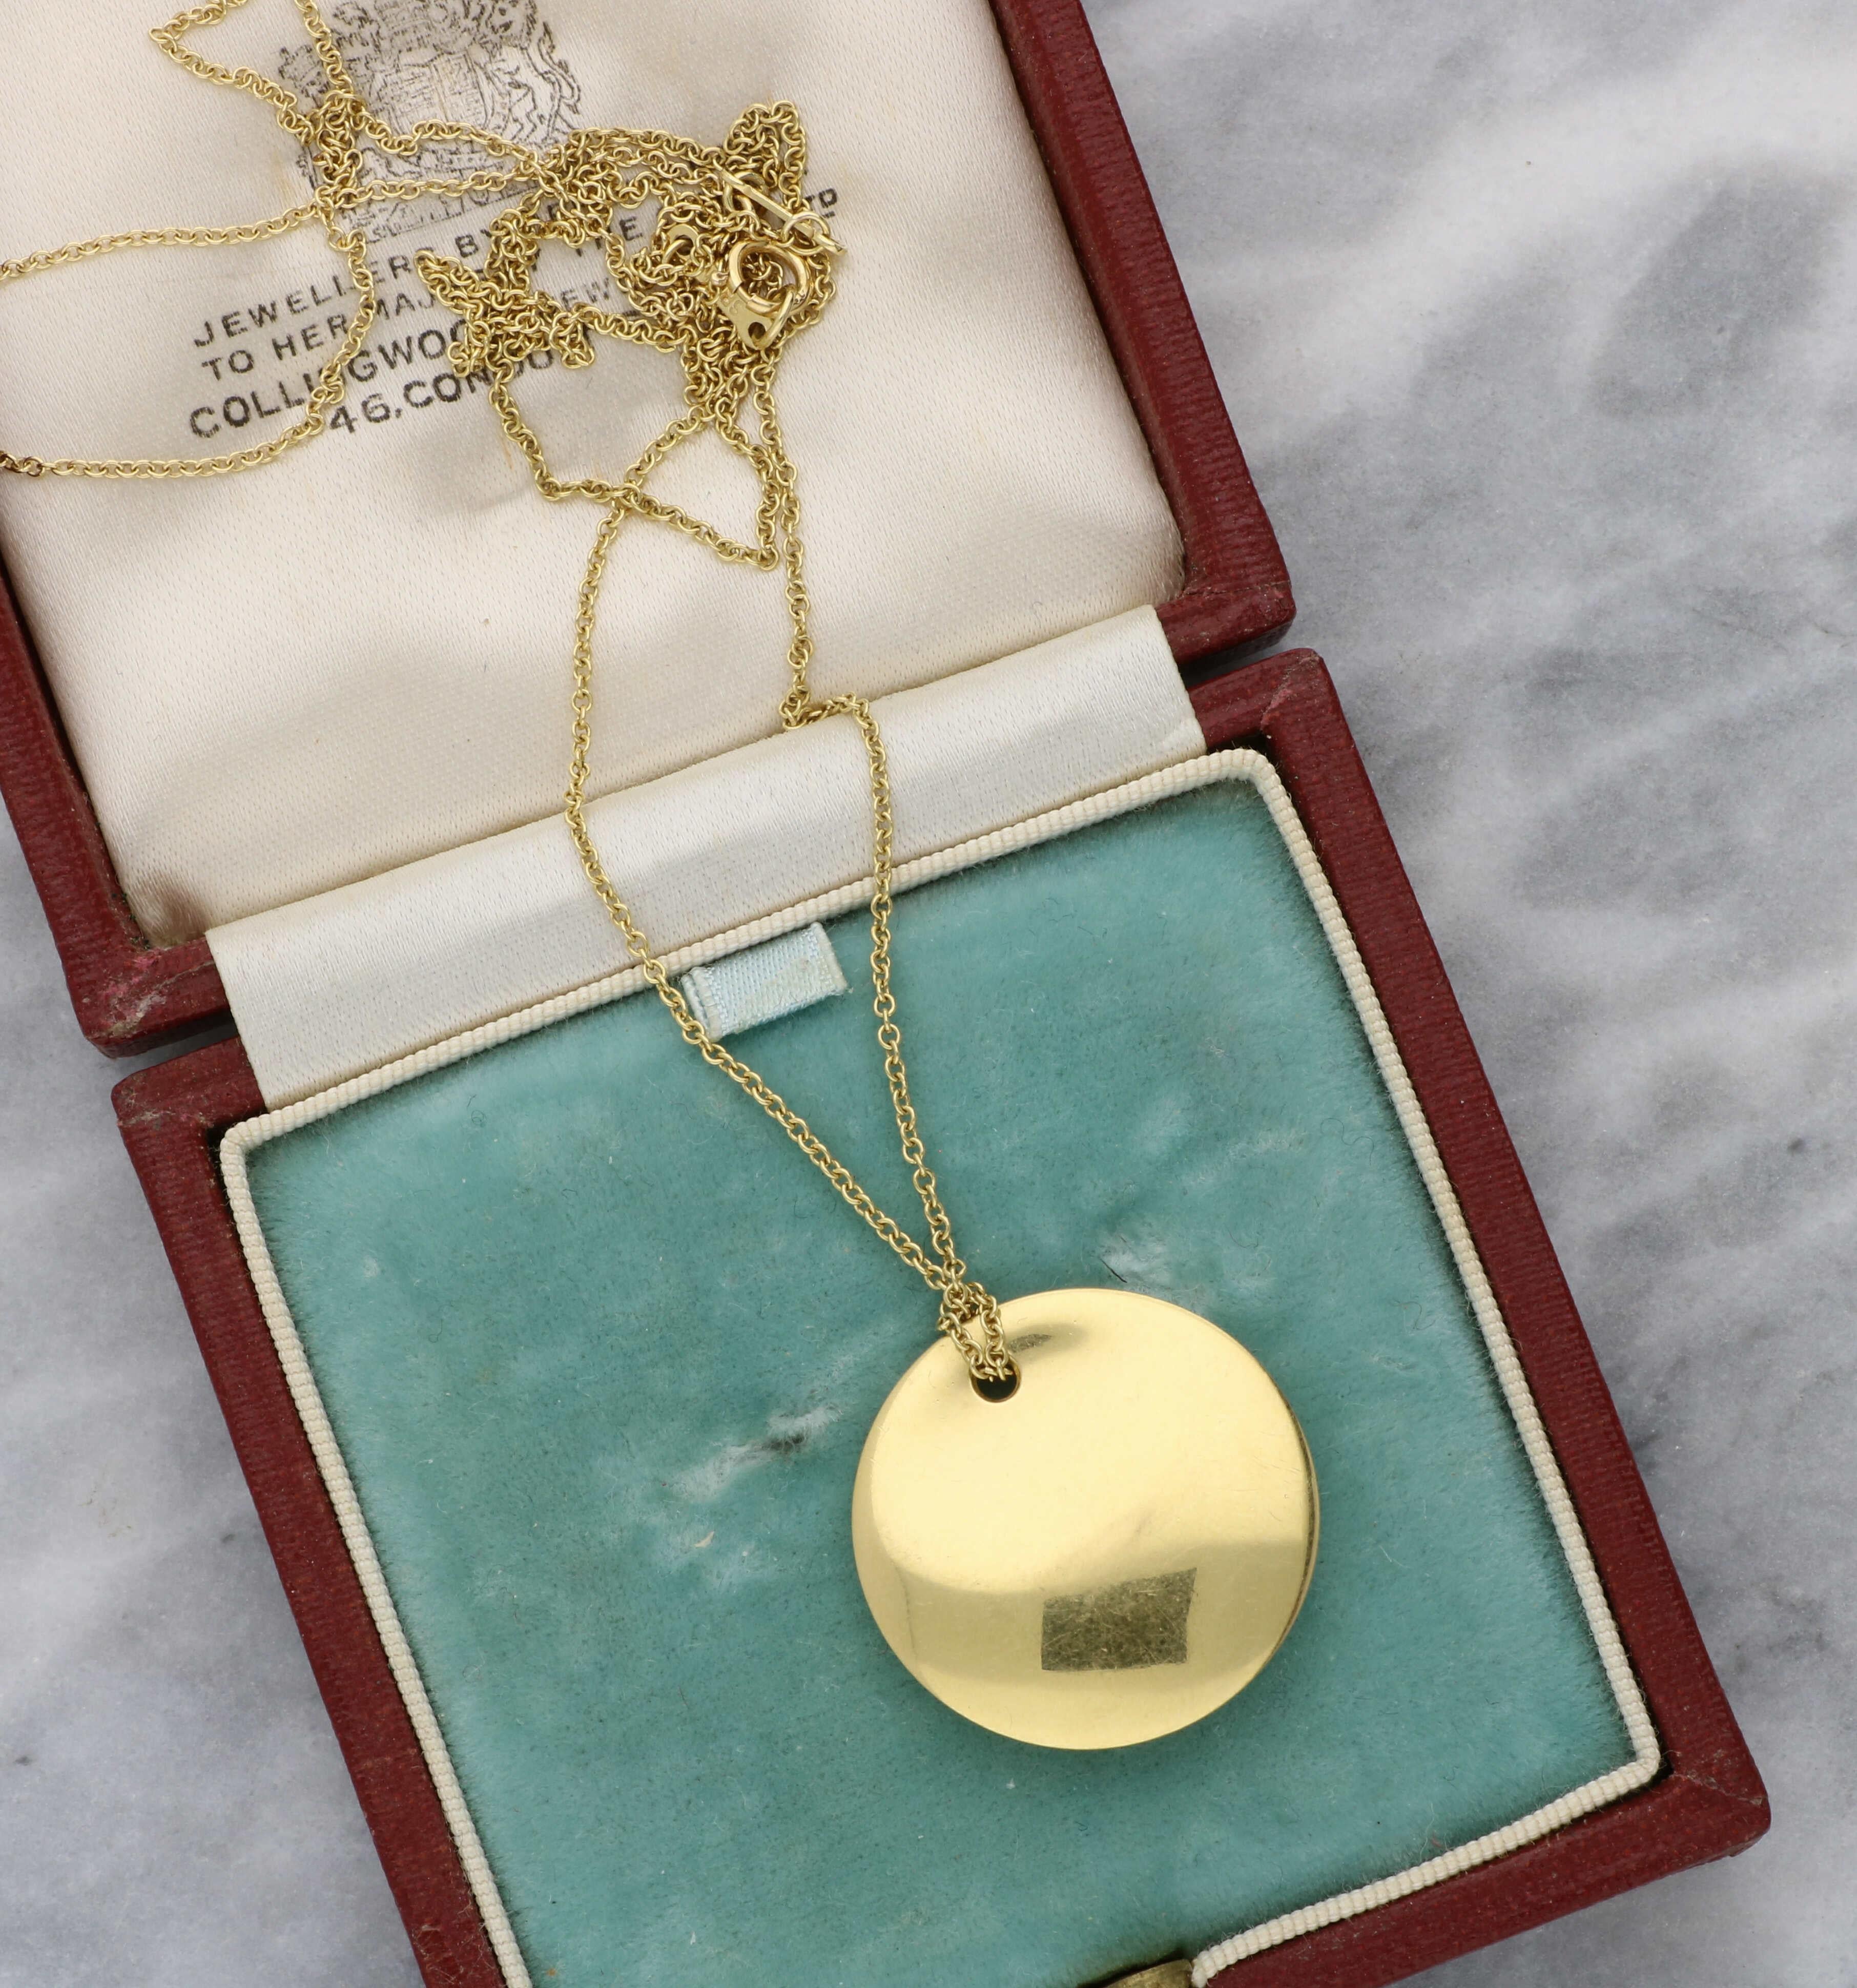 A lovely 18ct yellow gold Tiffany & Co pendant necklace by Elsa Peretti. The pendant measures 22.5mm round and 4mm wide. The chain measures 23 inches and the total weight of the chain and pendant is 7.4 grams. 

At Wave Antiques we donate 1% of all